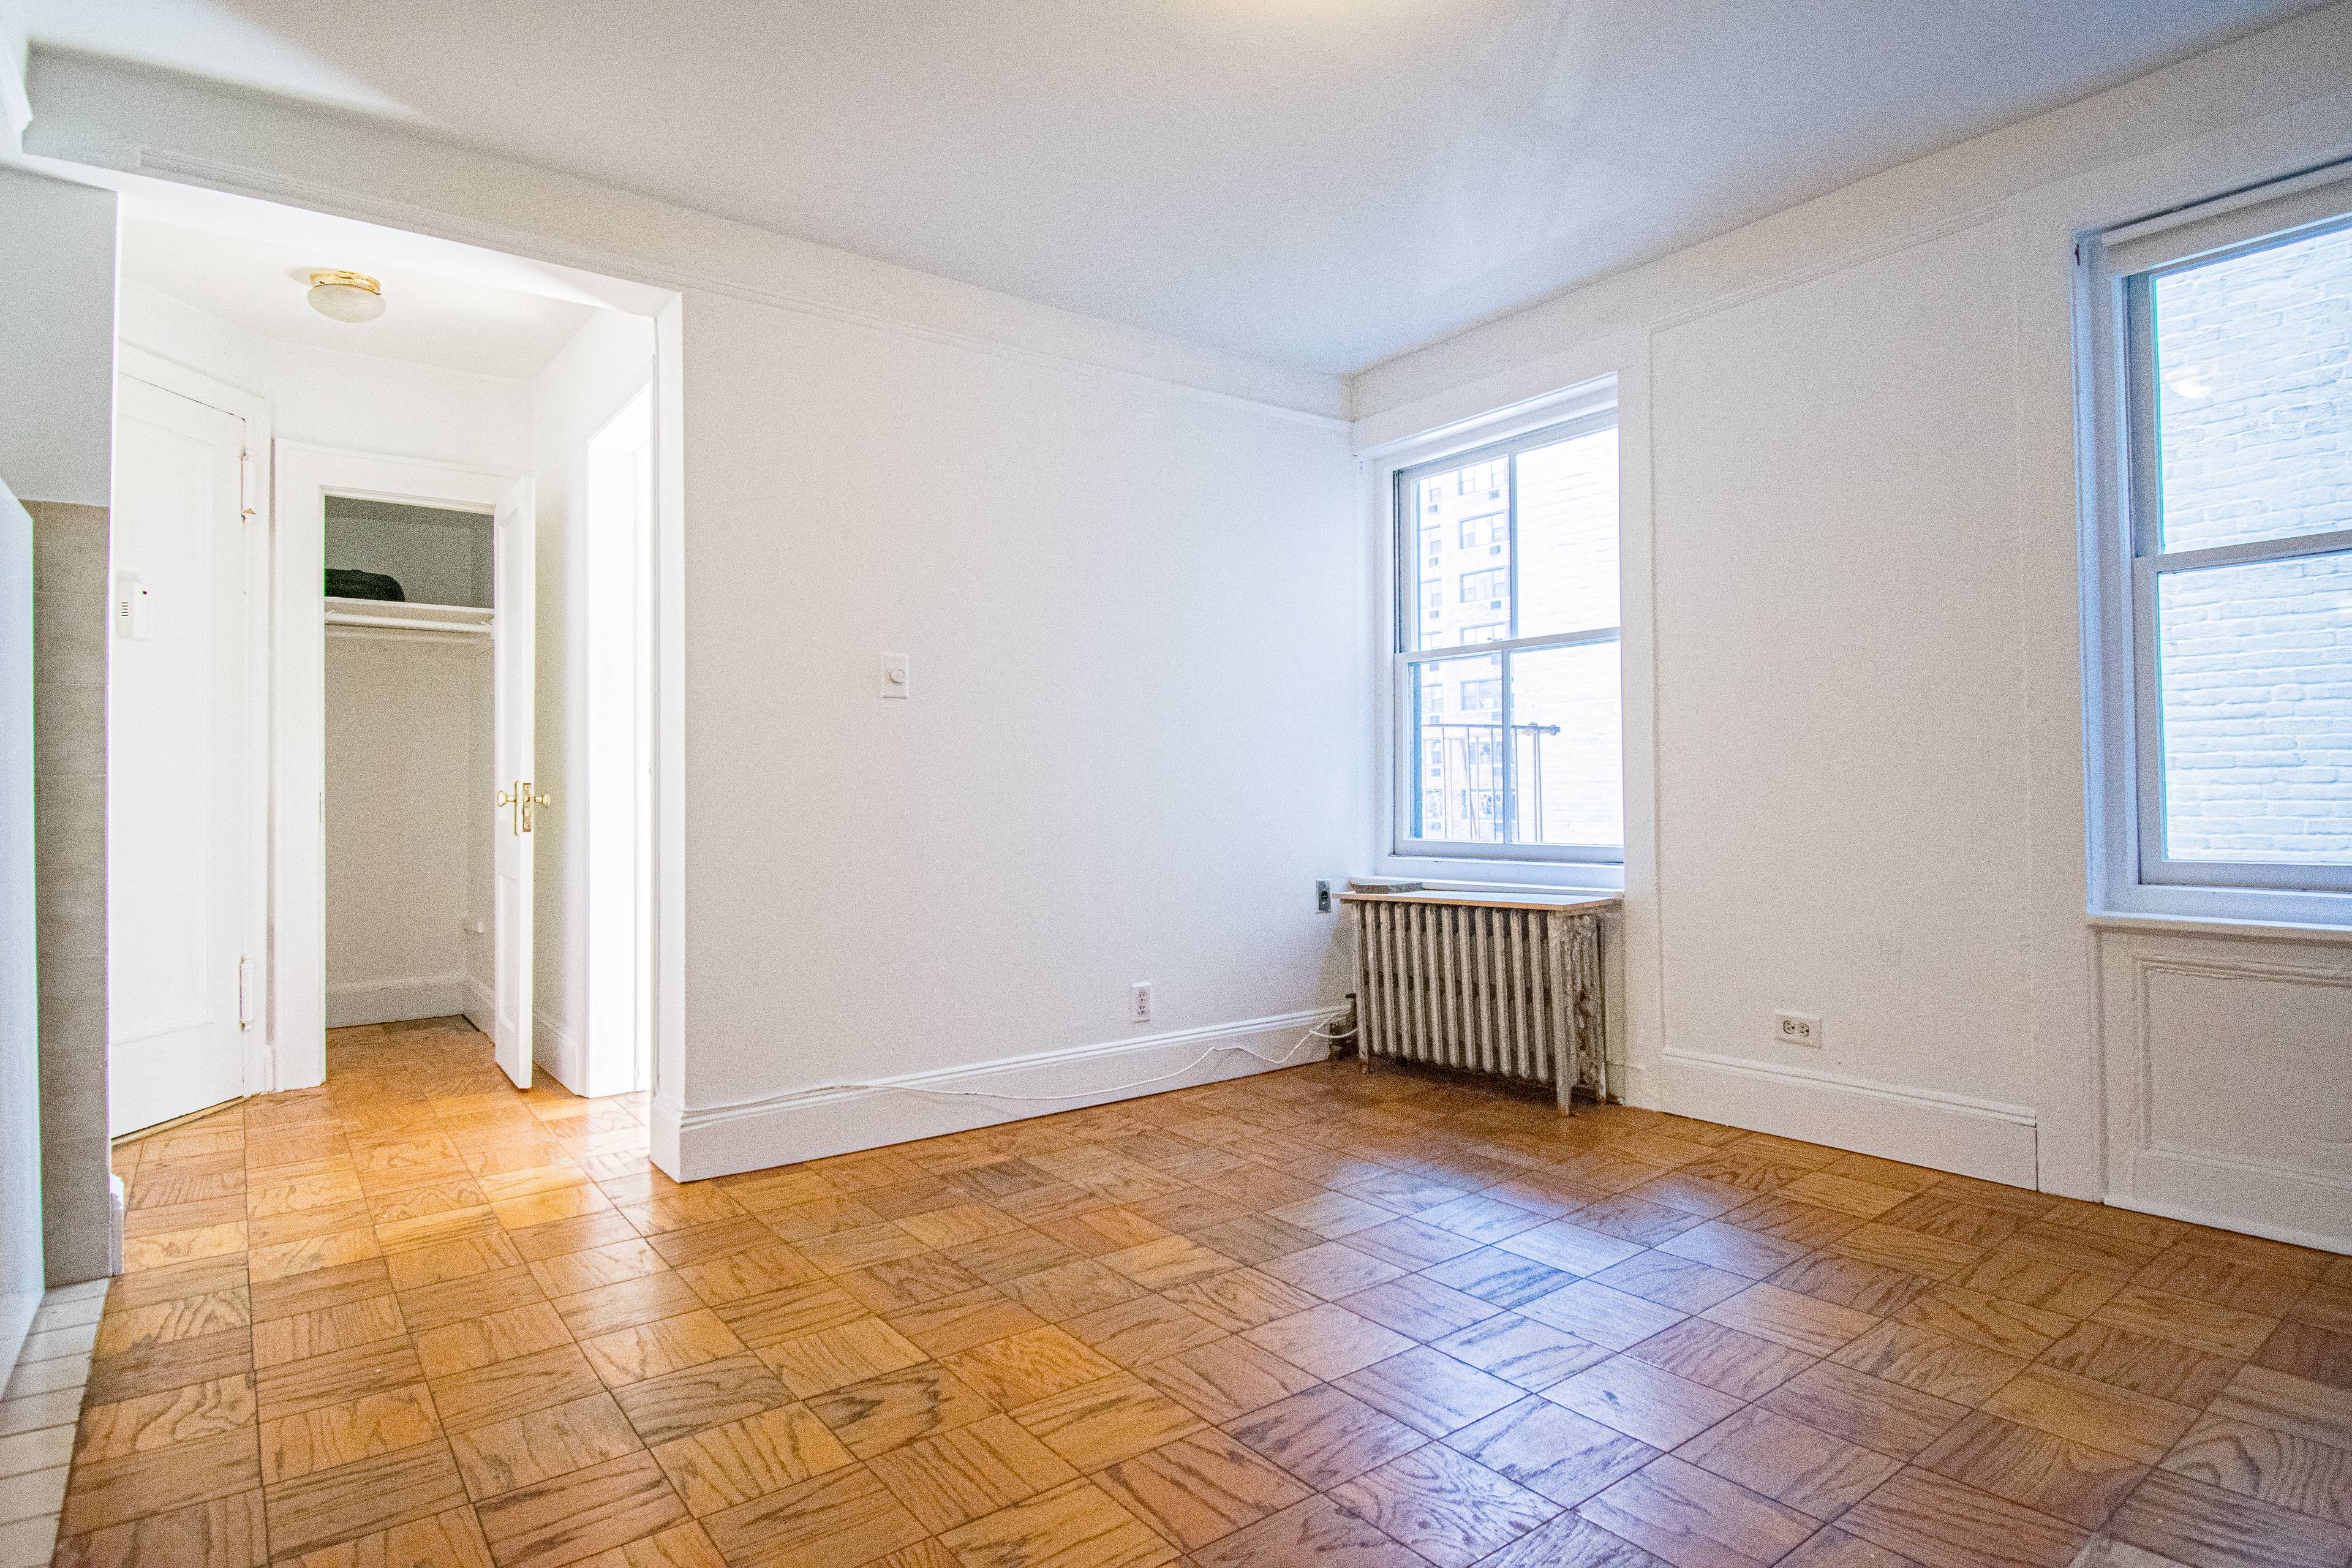 Cozy West Village Home Steps From Transportation and Museums (No Fee)